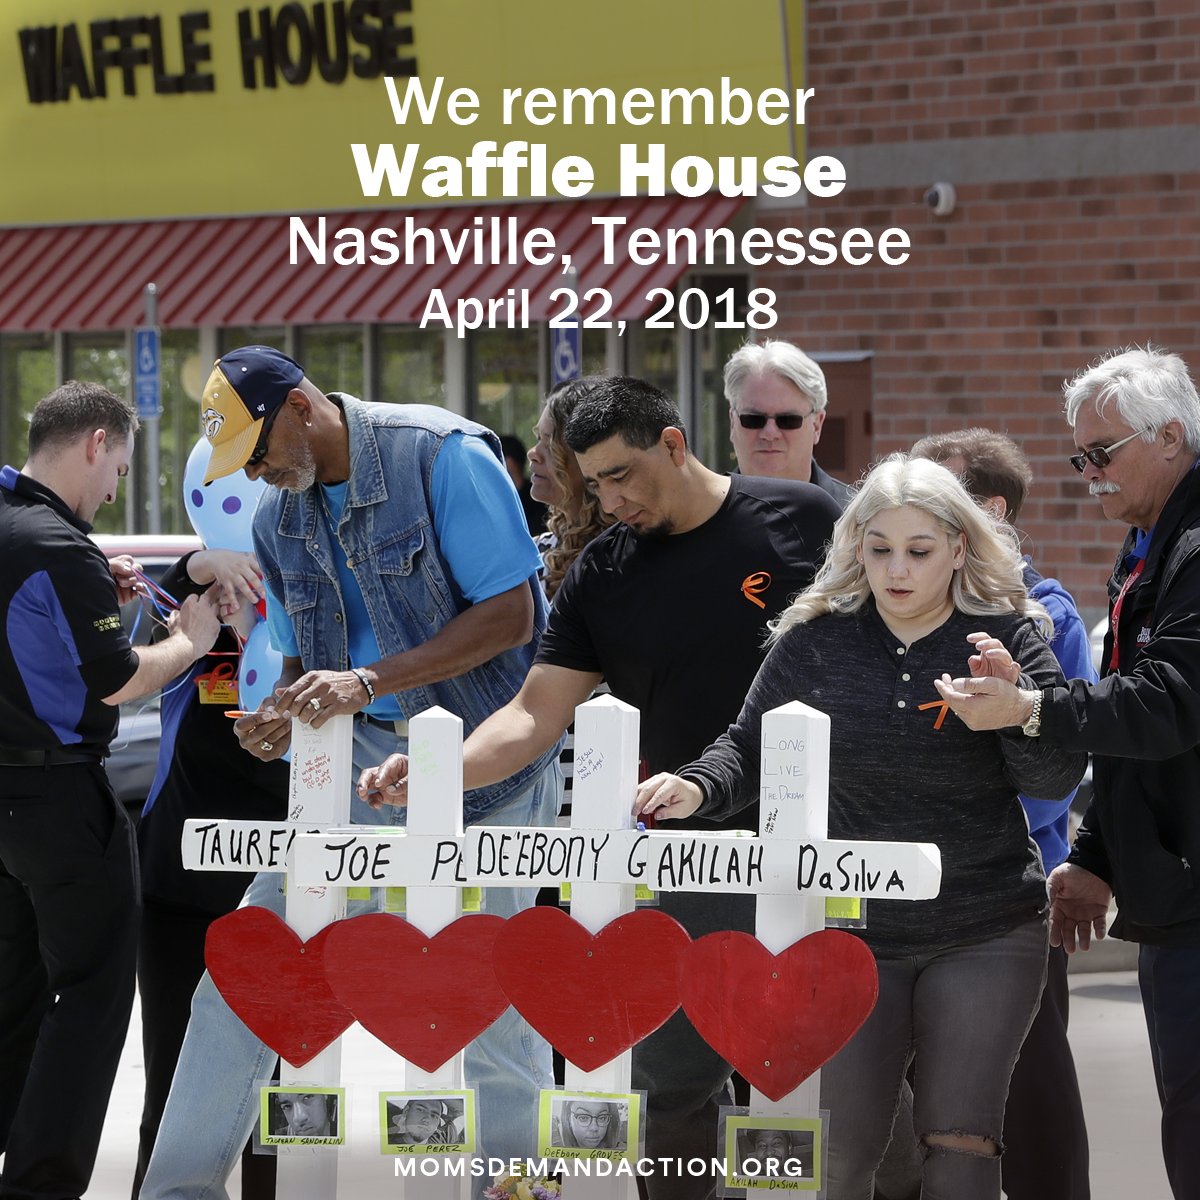 On this day six years ago, four people were killed and several others were wounded when a gunman armed with an AR-style rifle opened fire inside a Waffle House in Nashville, Tennessee. We hold the victims and survivors in our hearts as we work to #EndGunViolence in their honor.